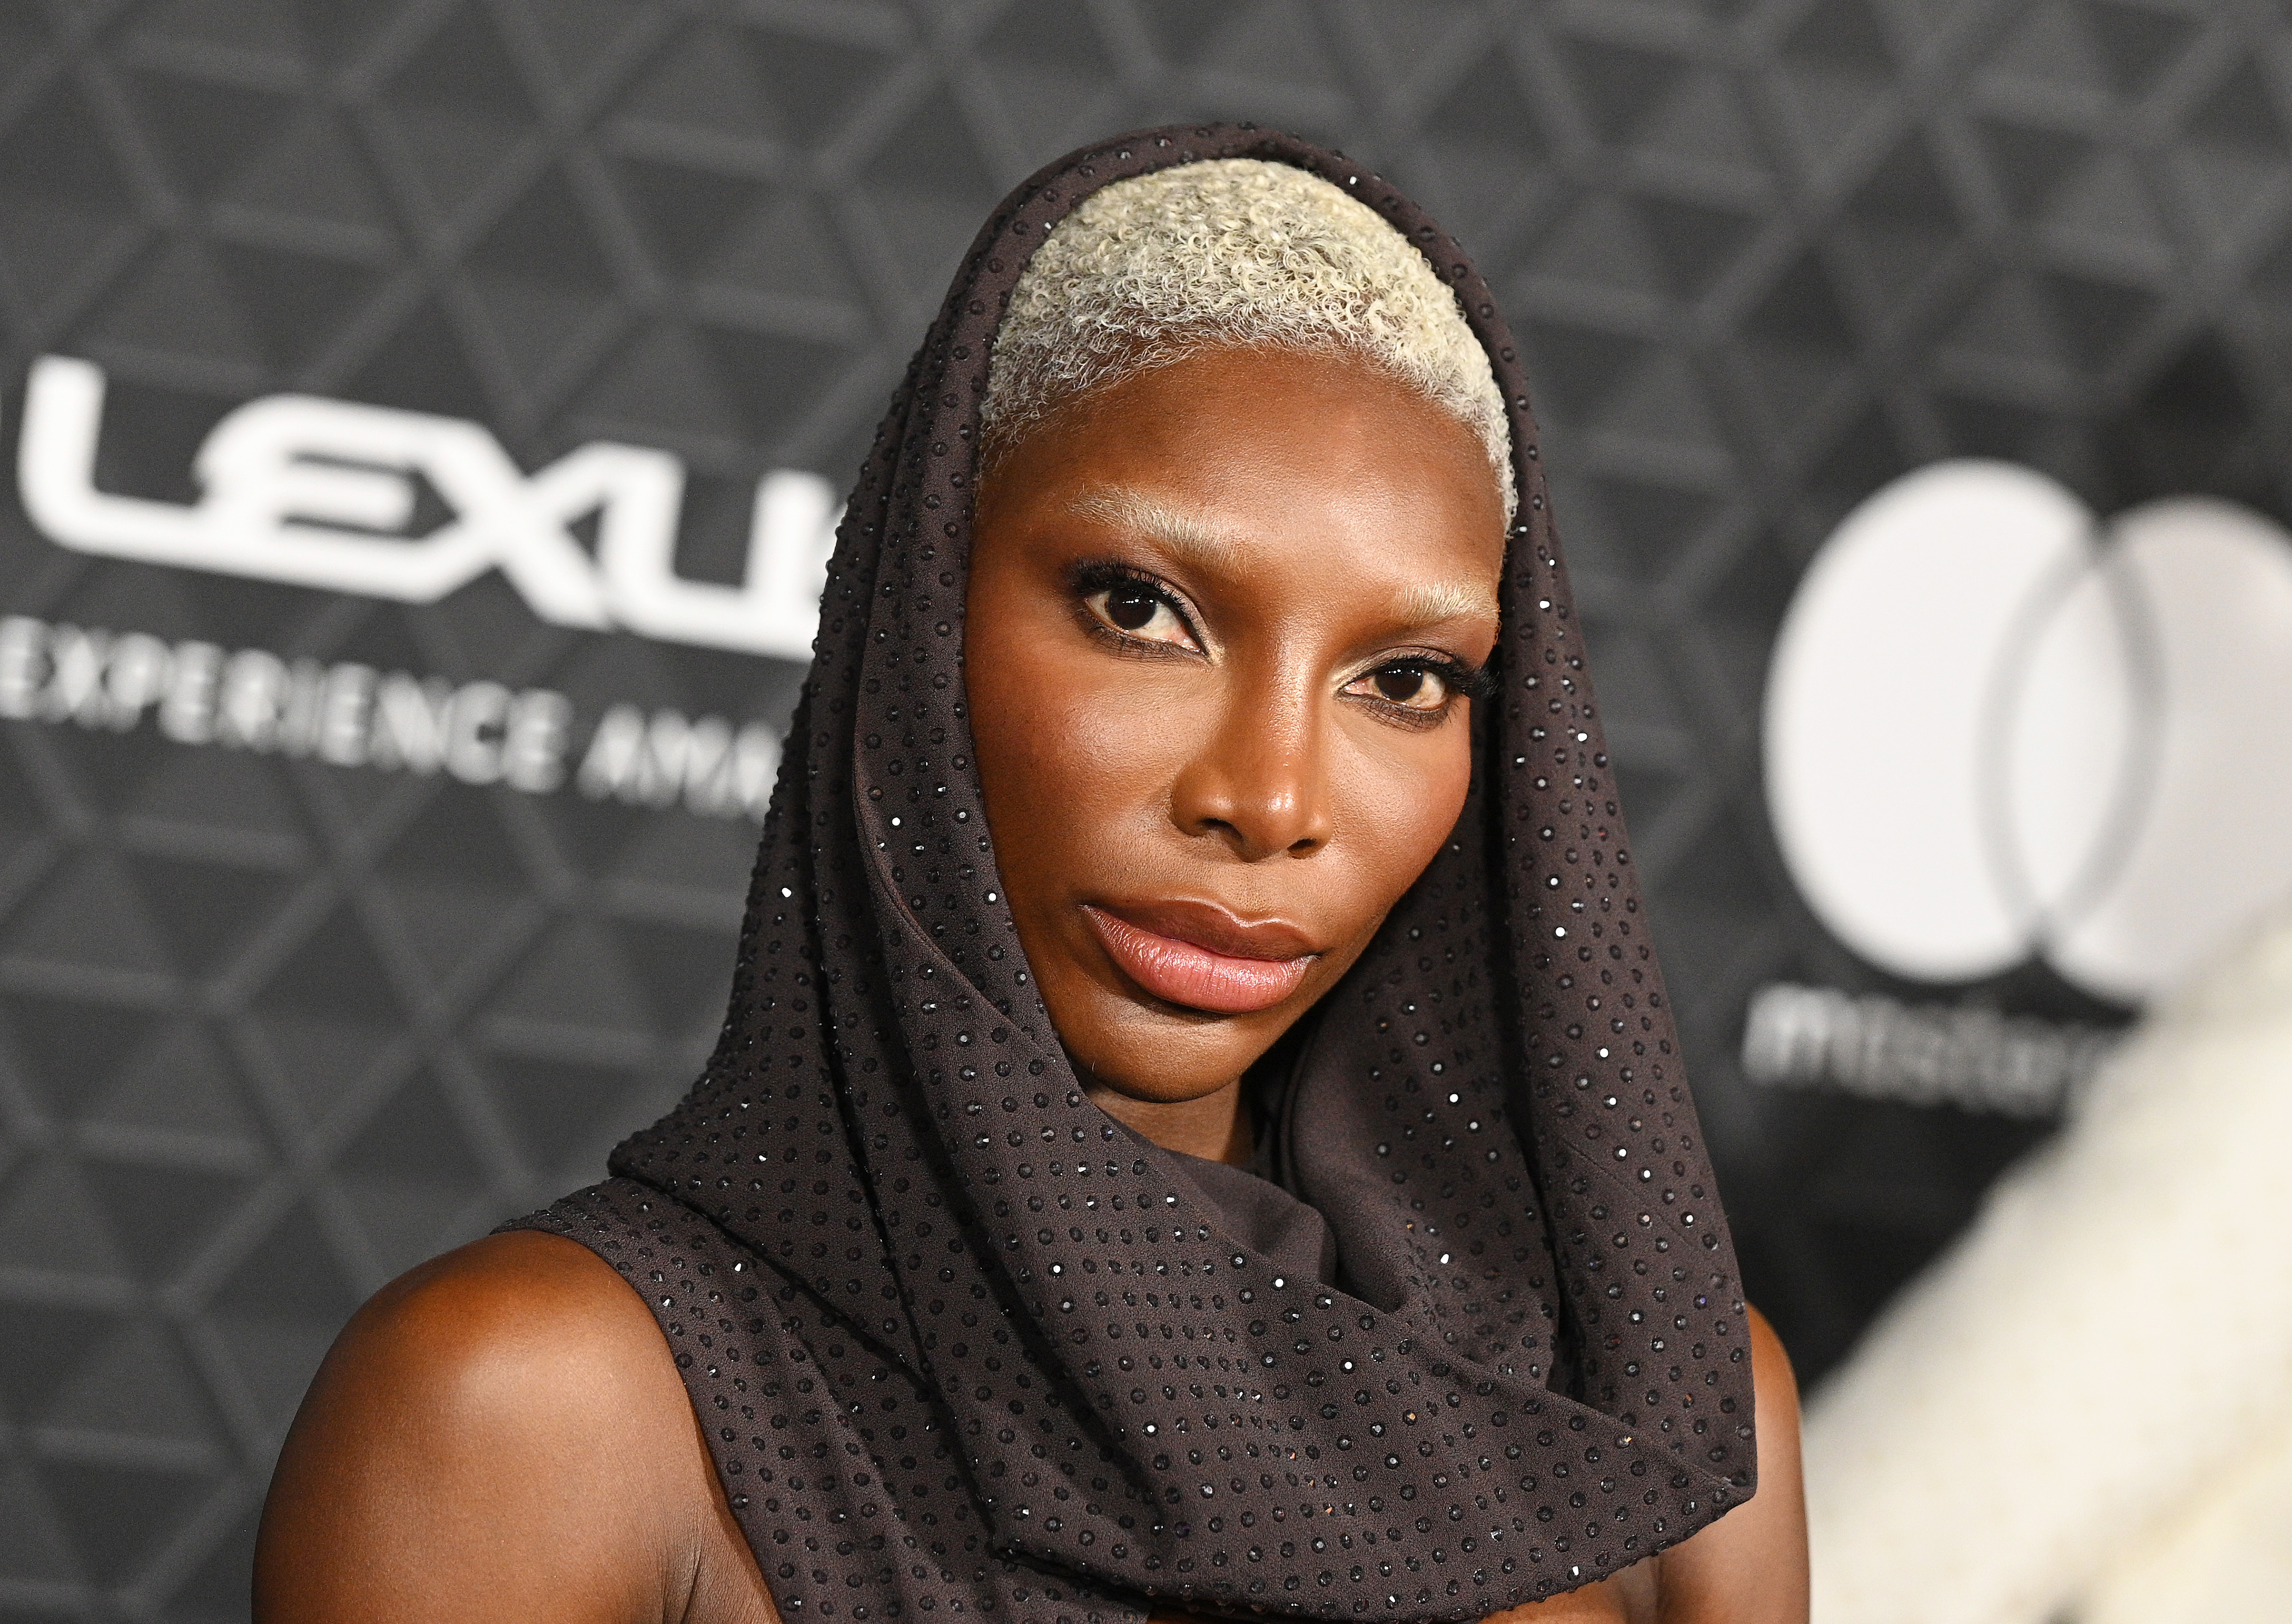 Michaela Coel attends the world premiere of Marvel Studios "Black Panther: Wakanda Forever" at the Dolby Theatre on October 26, 2022, in Los Angeles, California. | Source: Getty Images